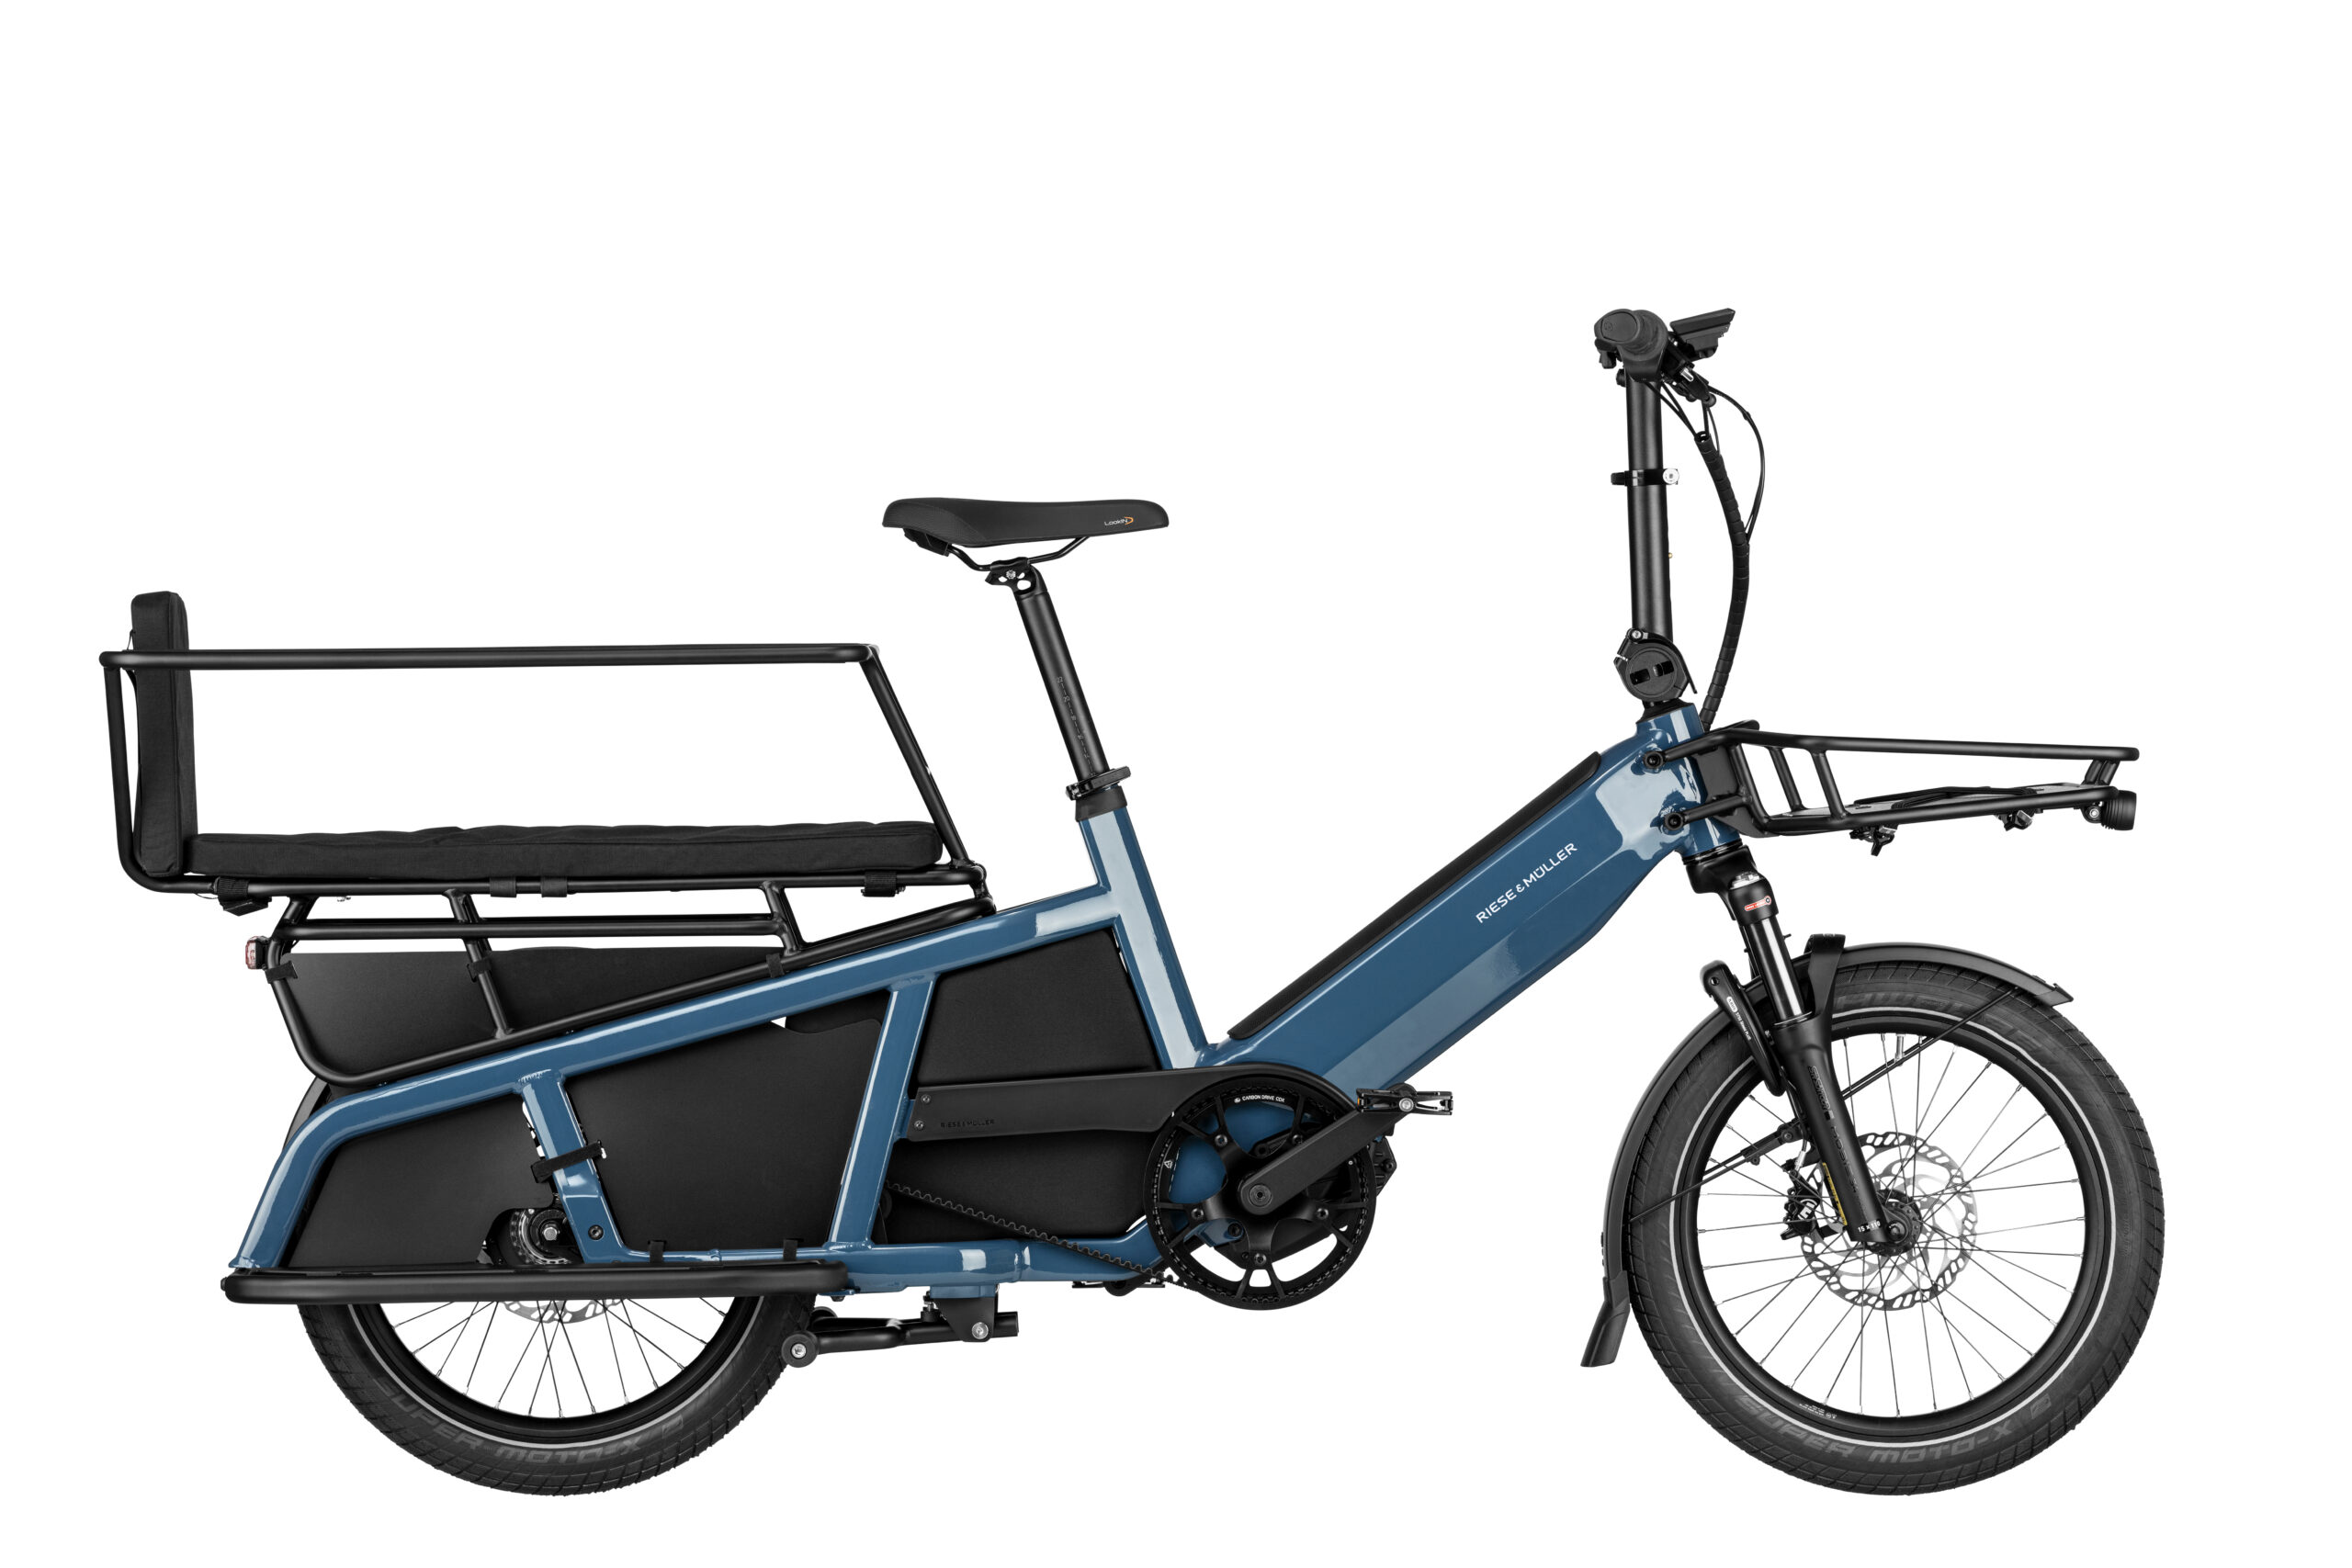 Multitinker vario in Petrol & Black with safety bar kit and front cargo carrier